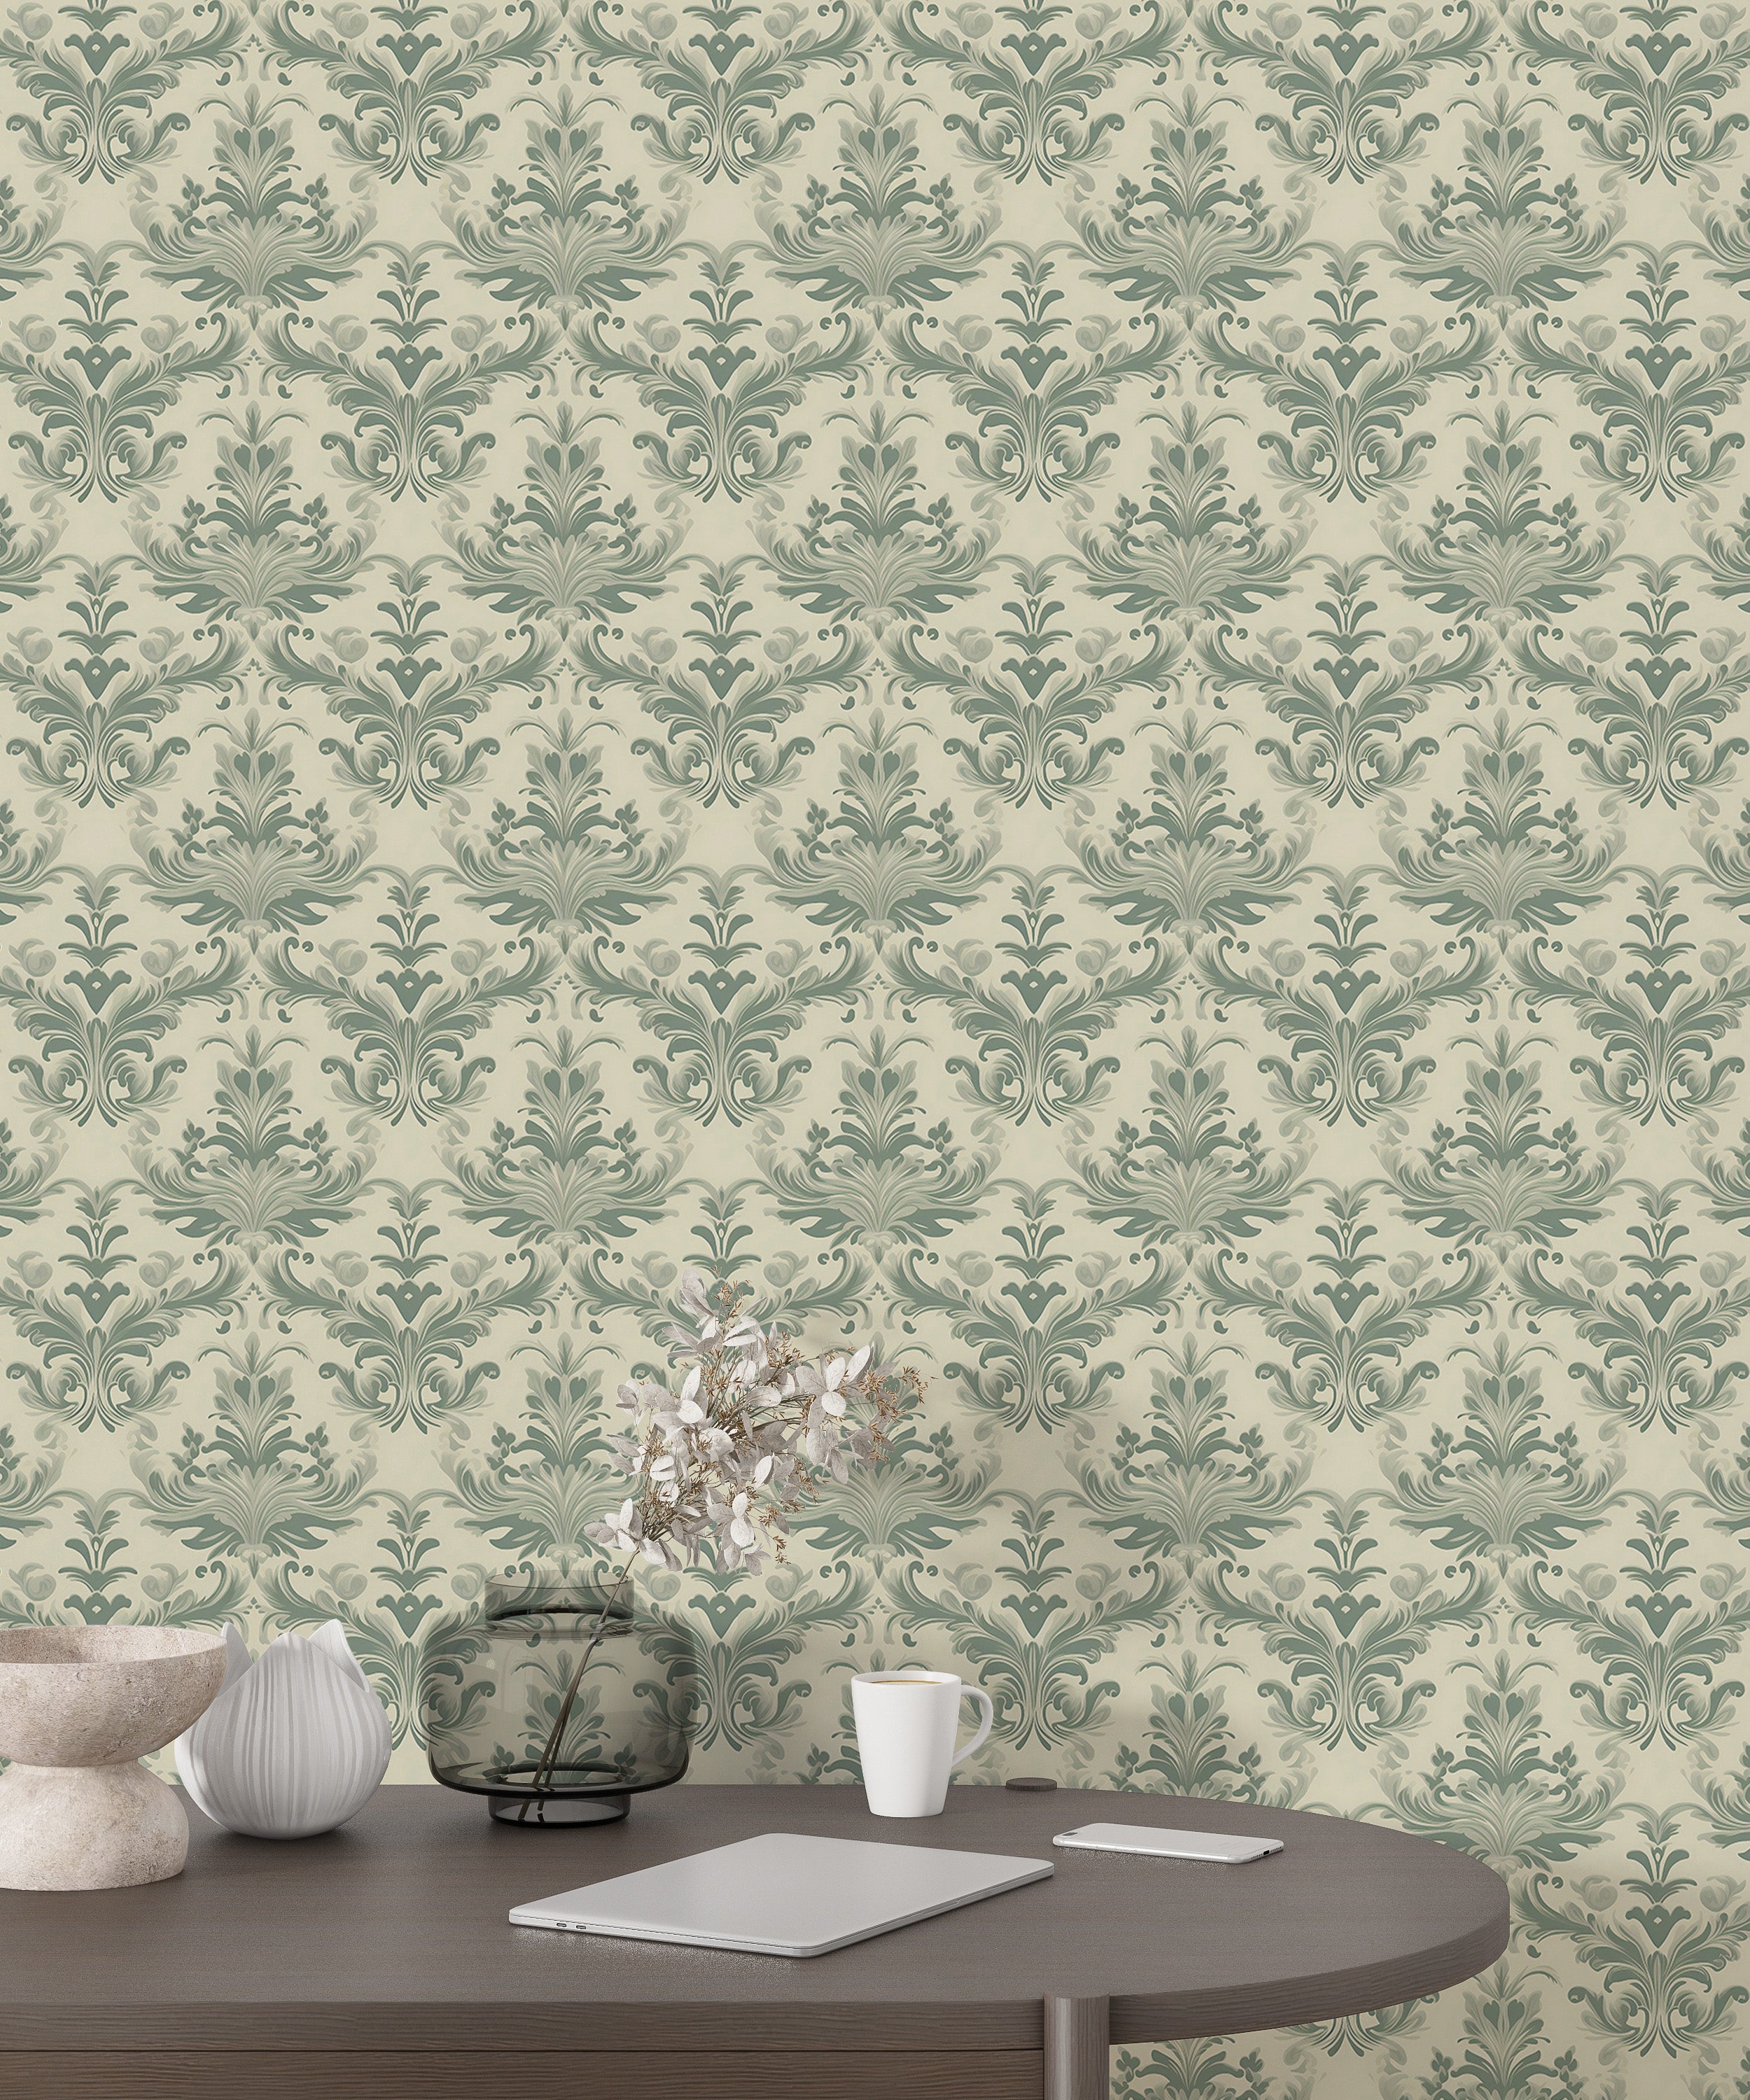 Classic Wallpaper | Traditional Wall Decal | Green and Beige Wallpaper | Vintage Peel and Stick Green Wallpaper | Removable Classic Wall Art